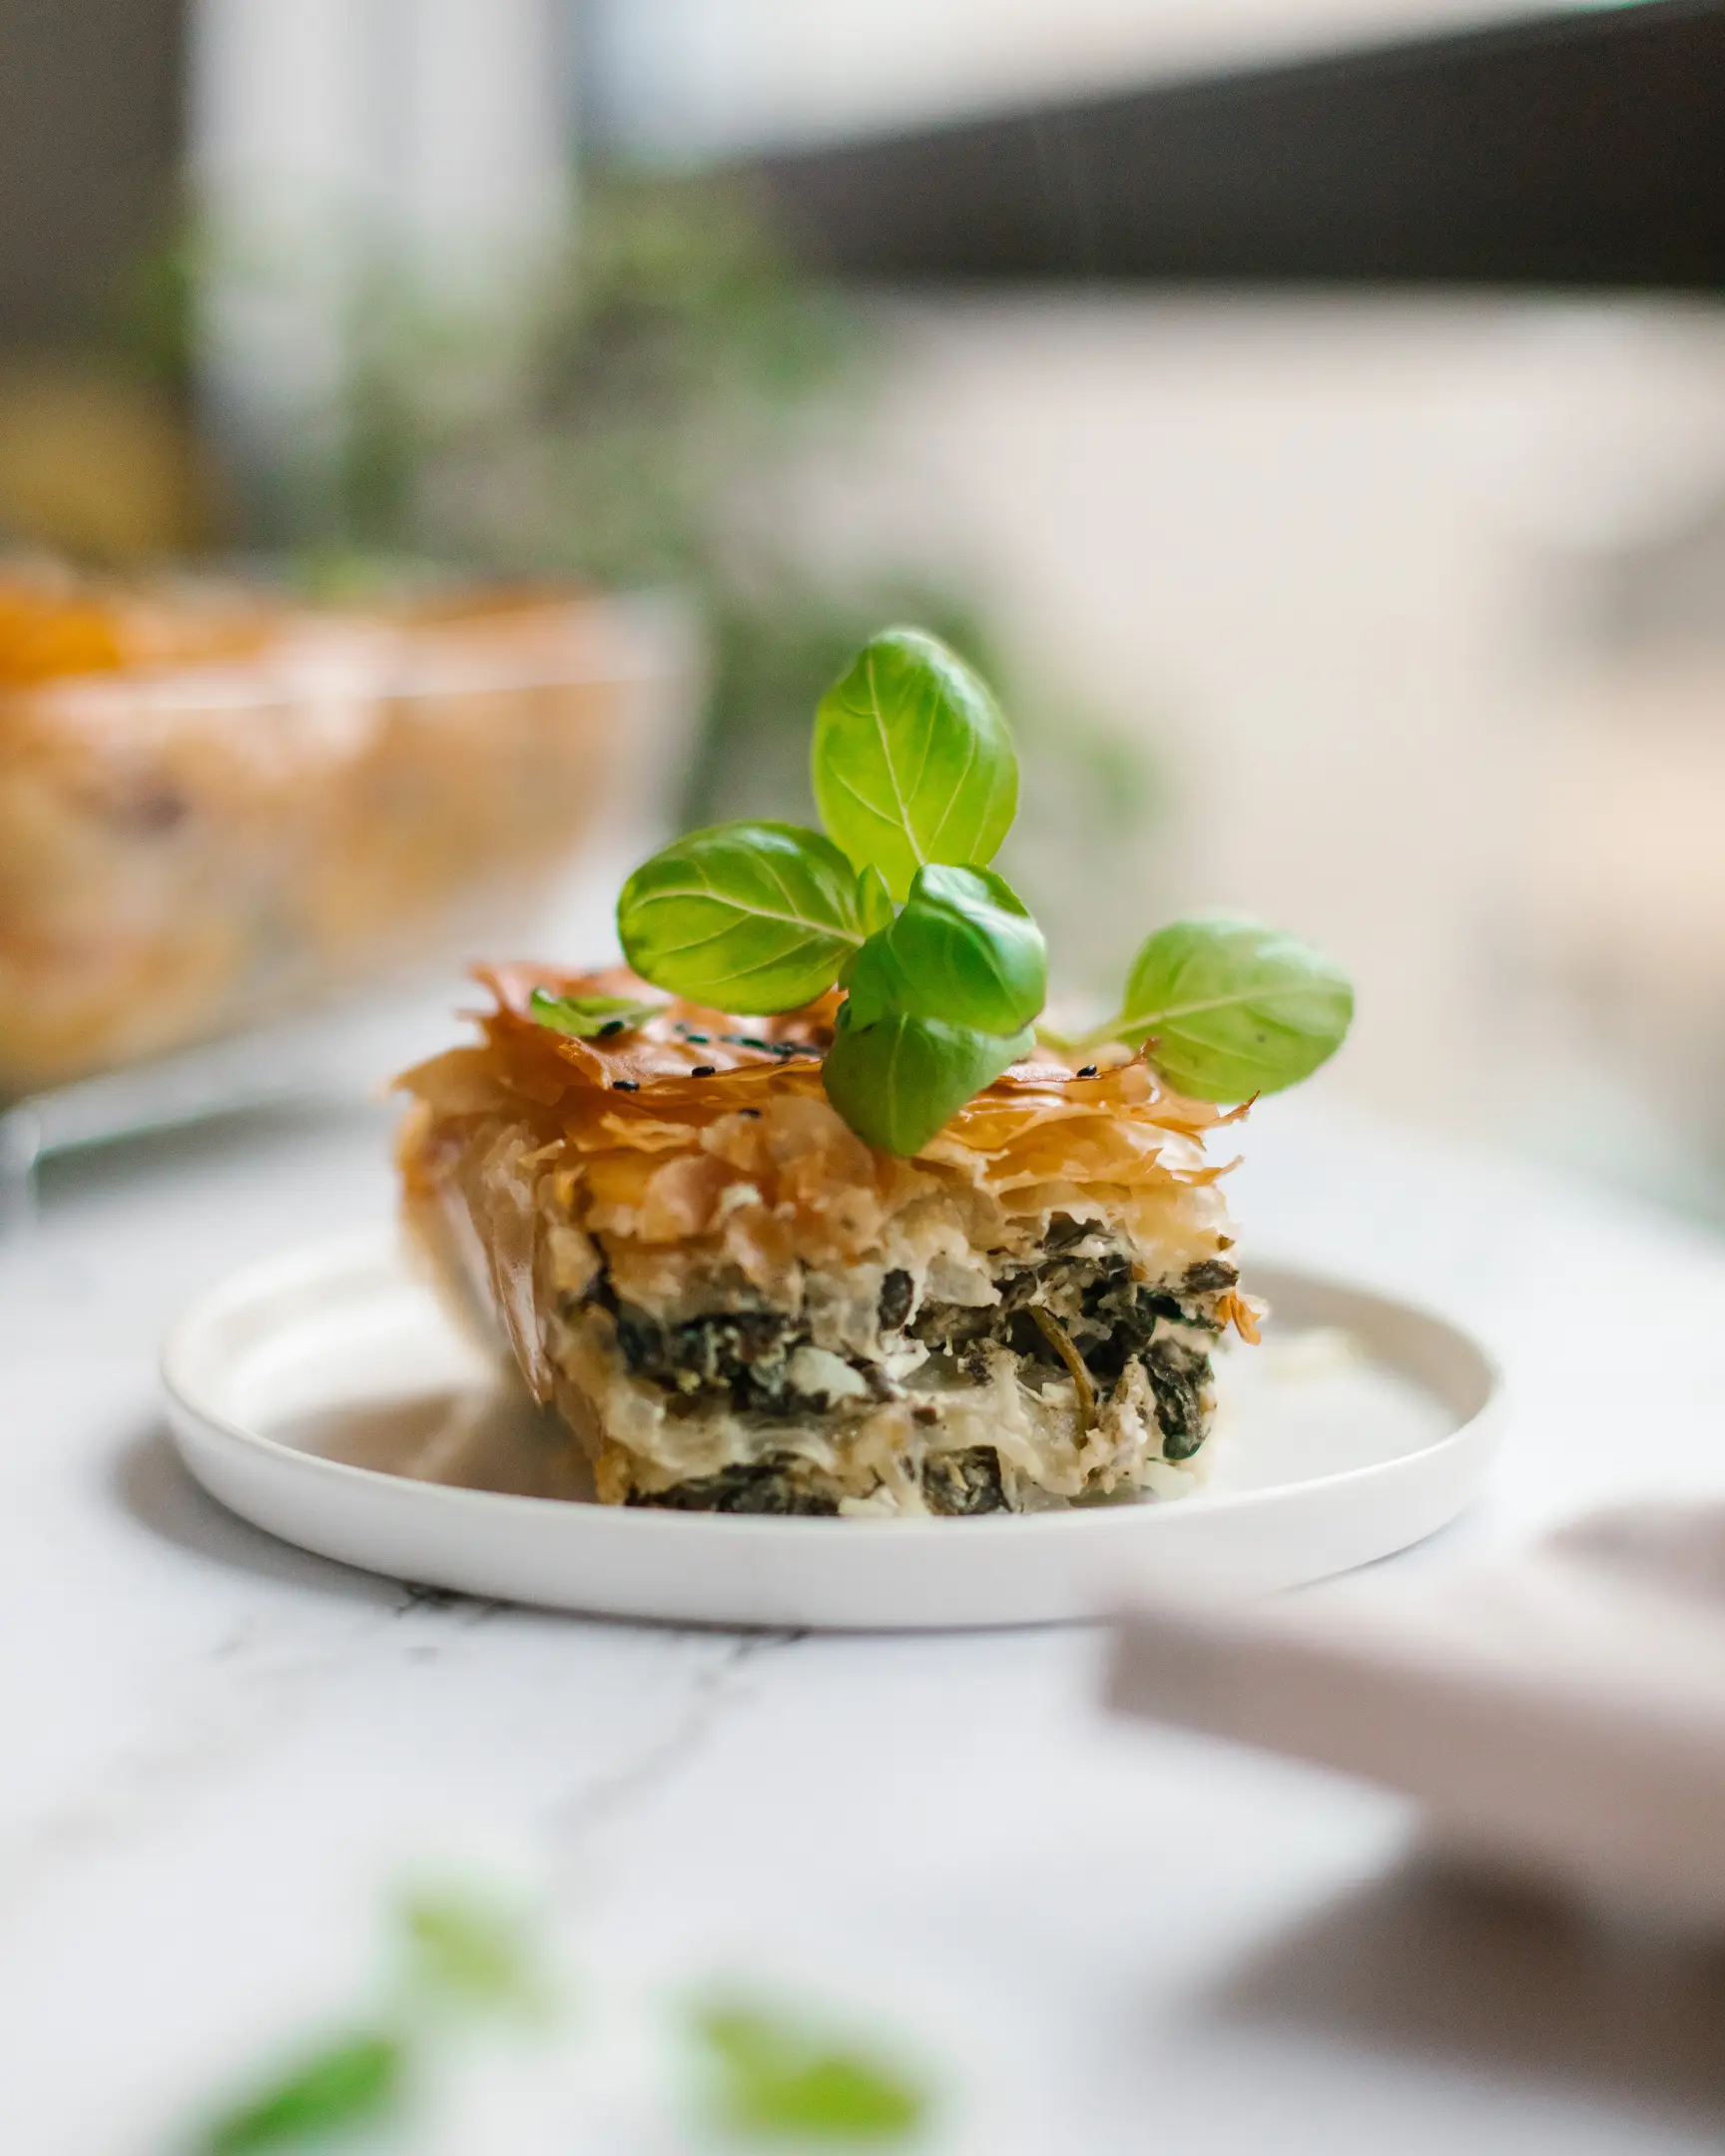 A piece of Greek spanakopita pie is on a plate. A piece of Greek spanakopita pie is on a plate, with a basil leaf on top.
Greens and the main part of the pie are visible in the background.